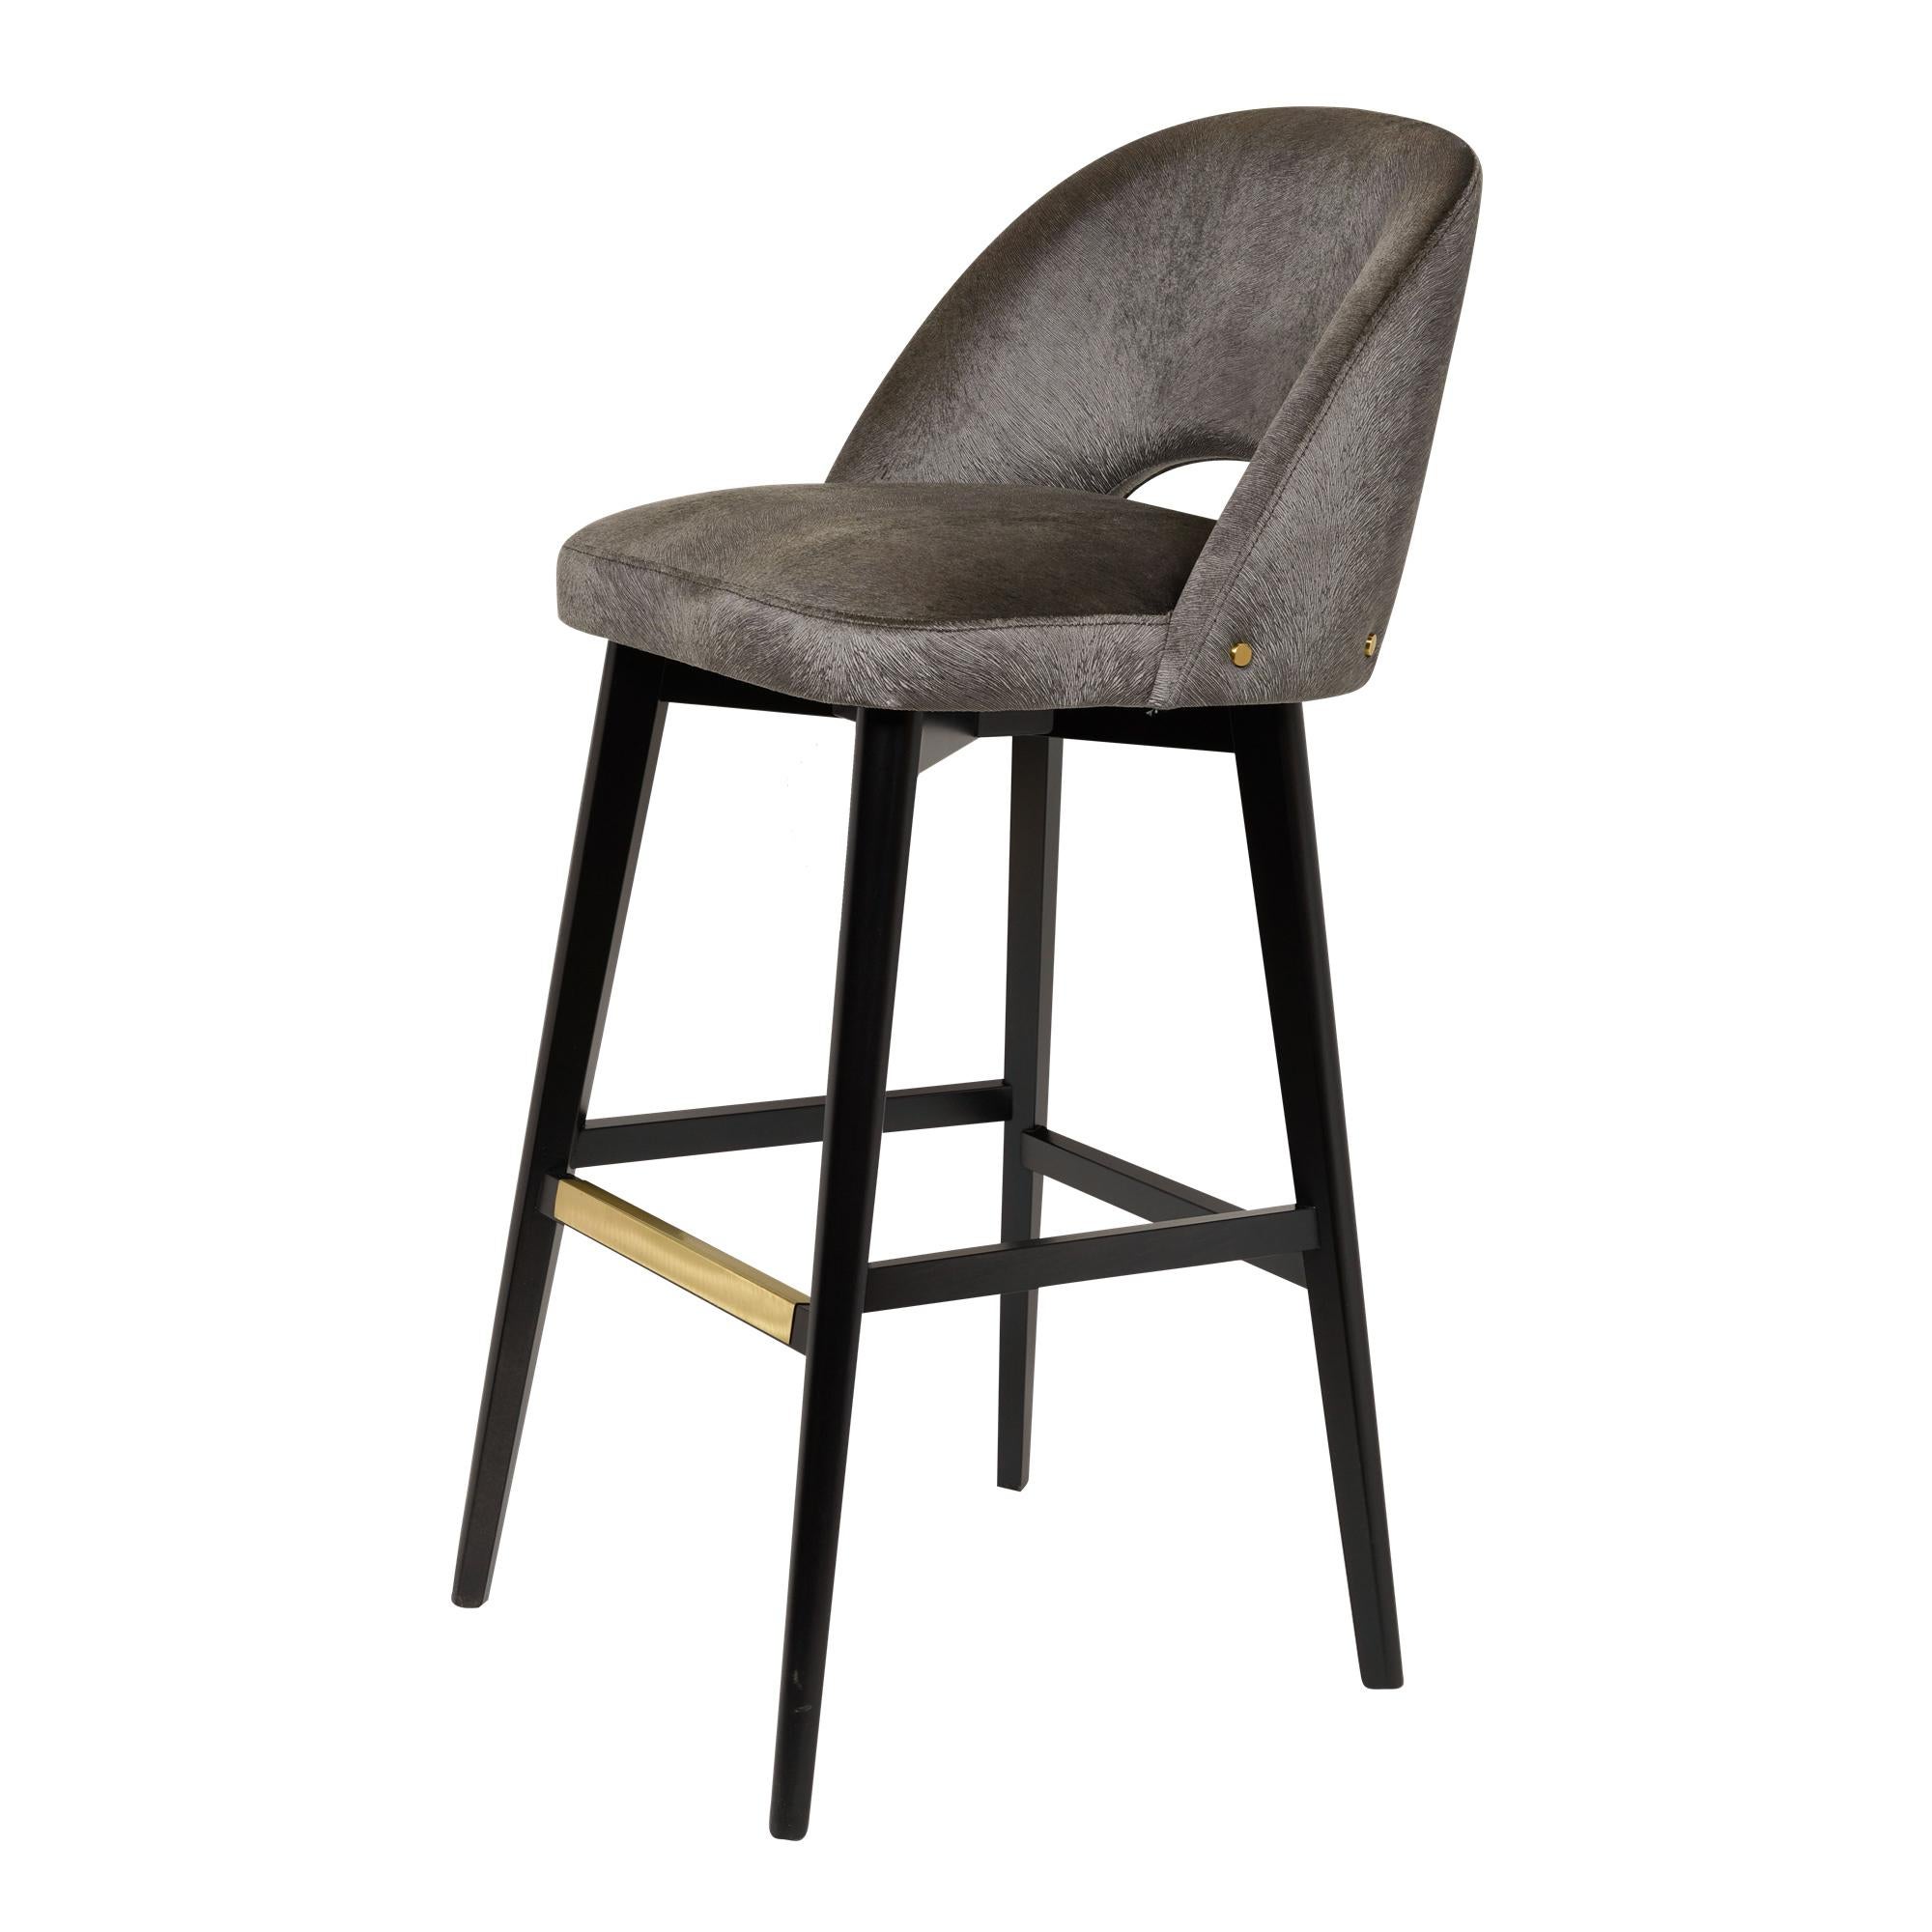 Bar stool with dark wenge stained beech legs, fully upholstered seat and back and brass footrest.
Available in counter or bar height and totally customizable including finish, wood, metal and COM.
Can be made with a swivel seat.